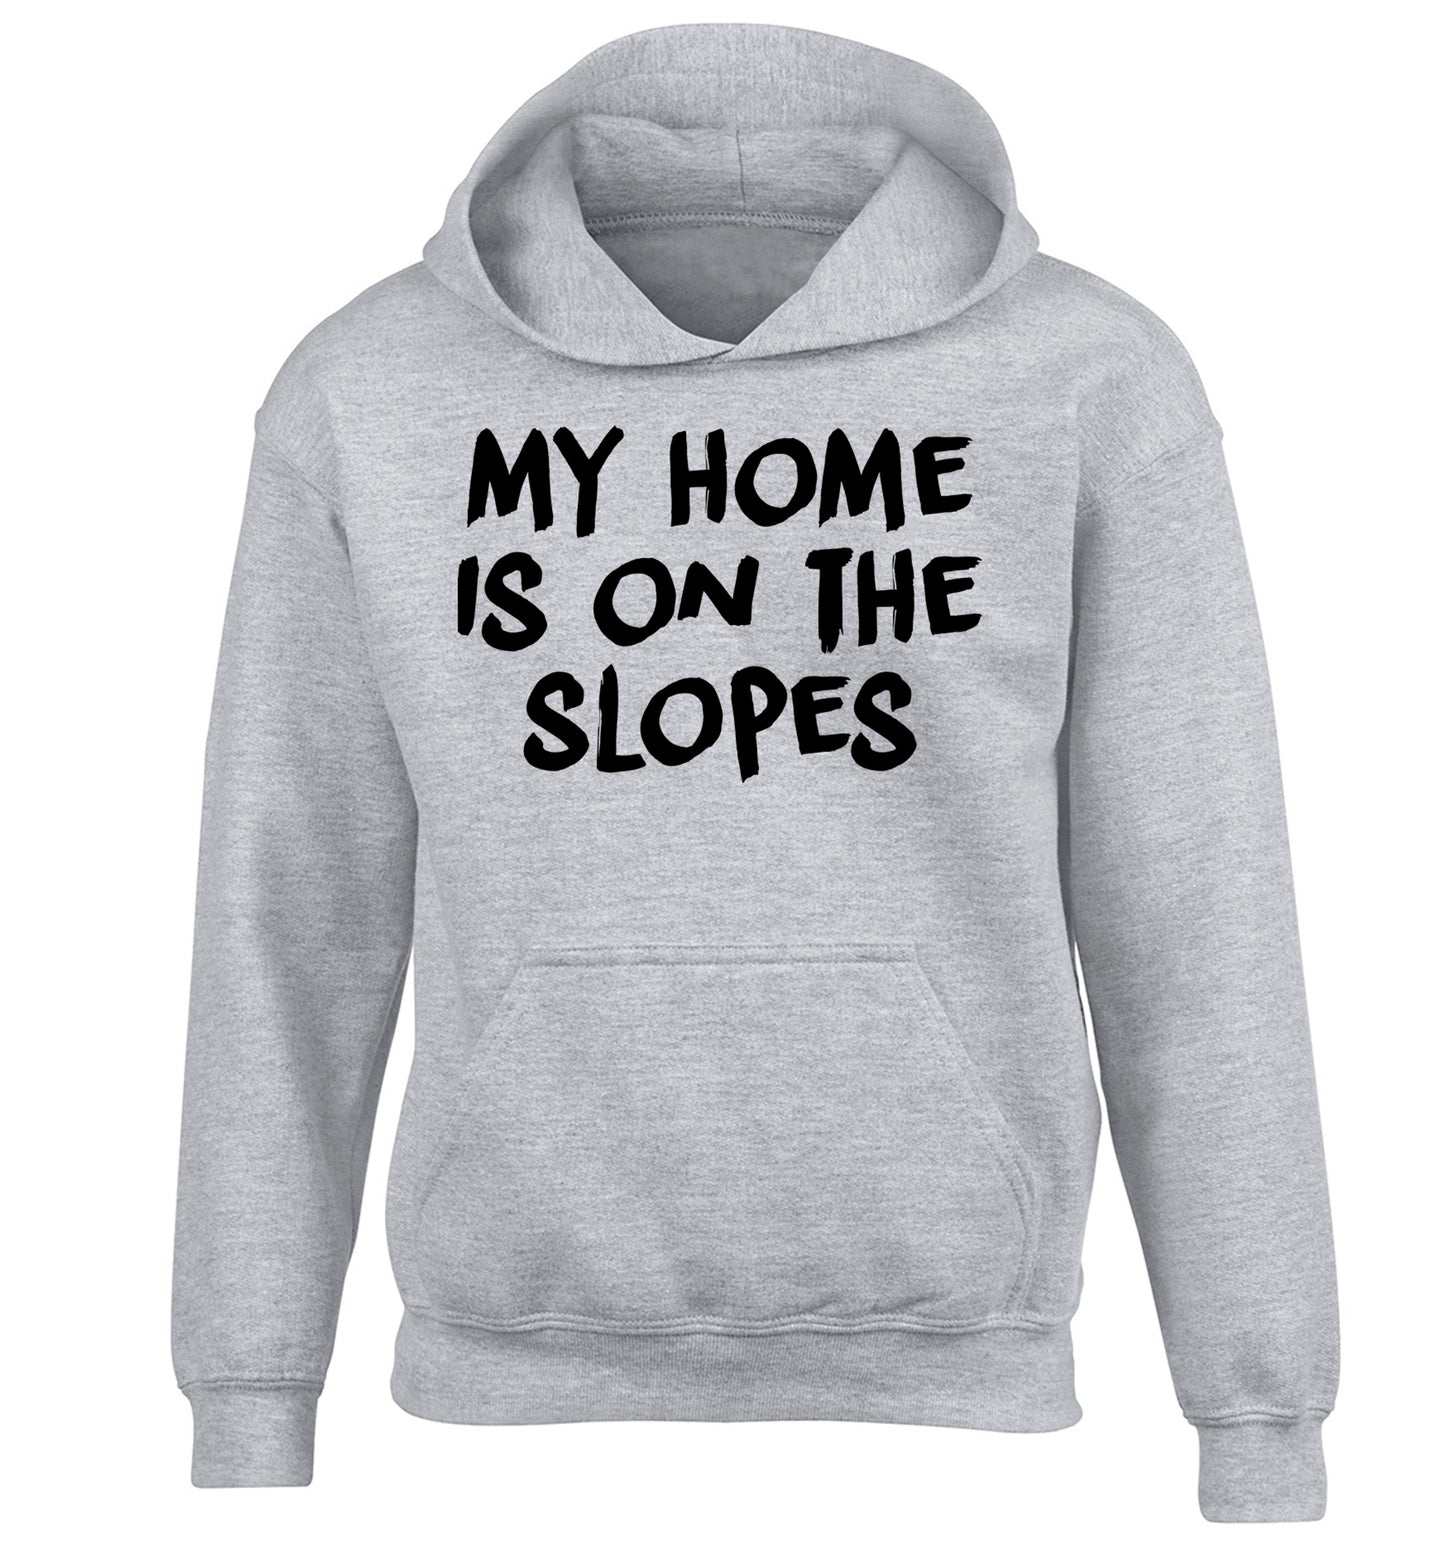 My home is on the slopes children's grey hoodie 12-14 Years